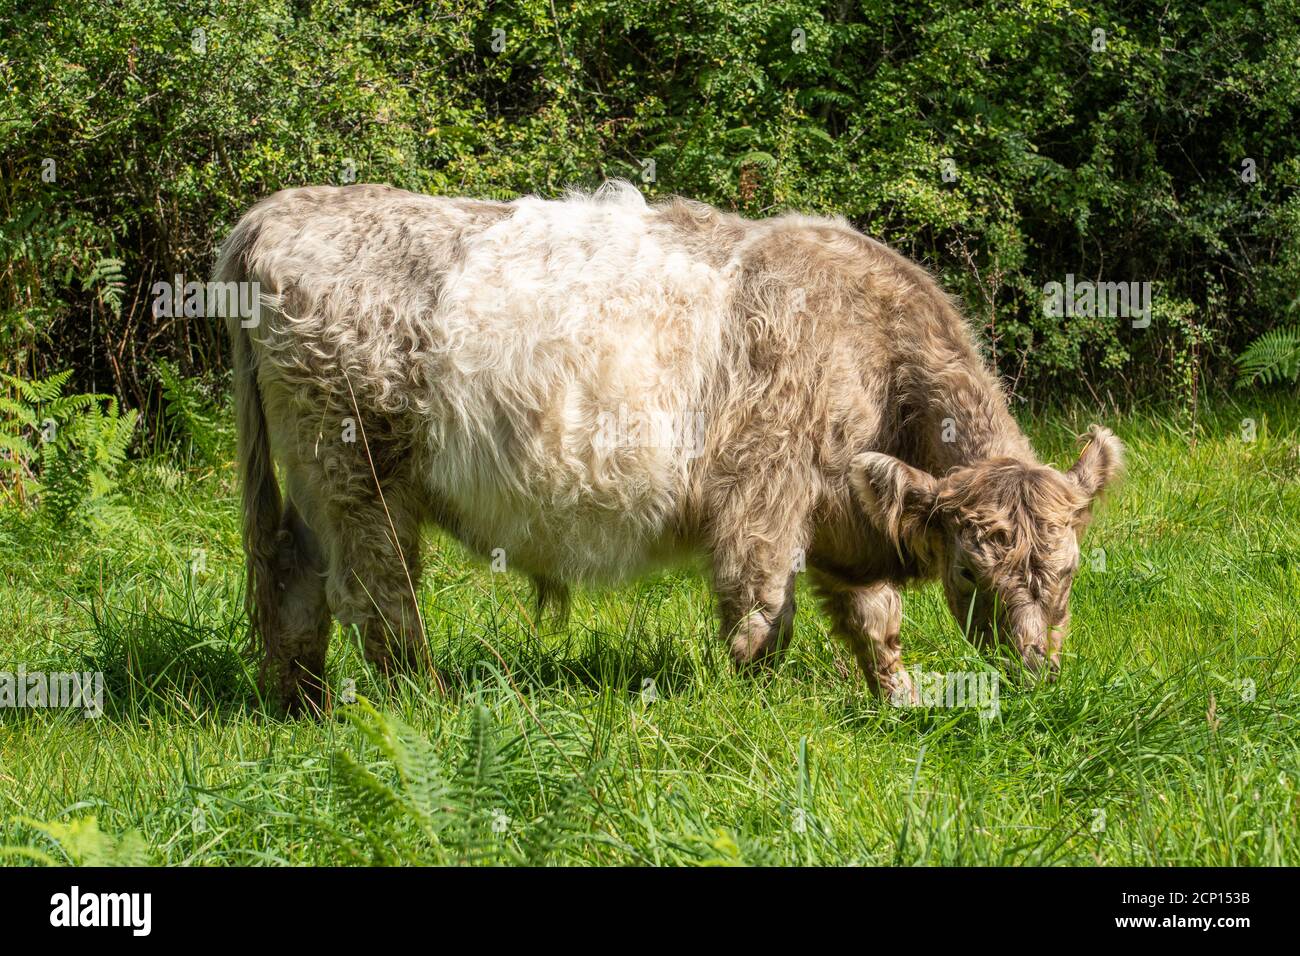 Belted galloway cattle, traditional Scottish hardy beef cattle breed with a white band round his middle, being used for habitat vegetation management Stock Photo